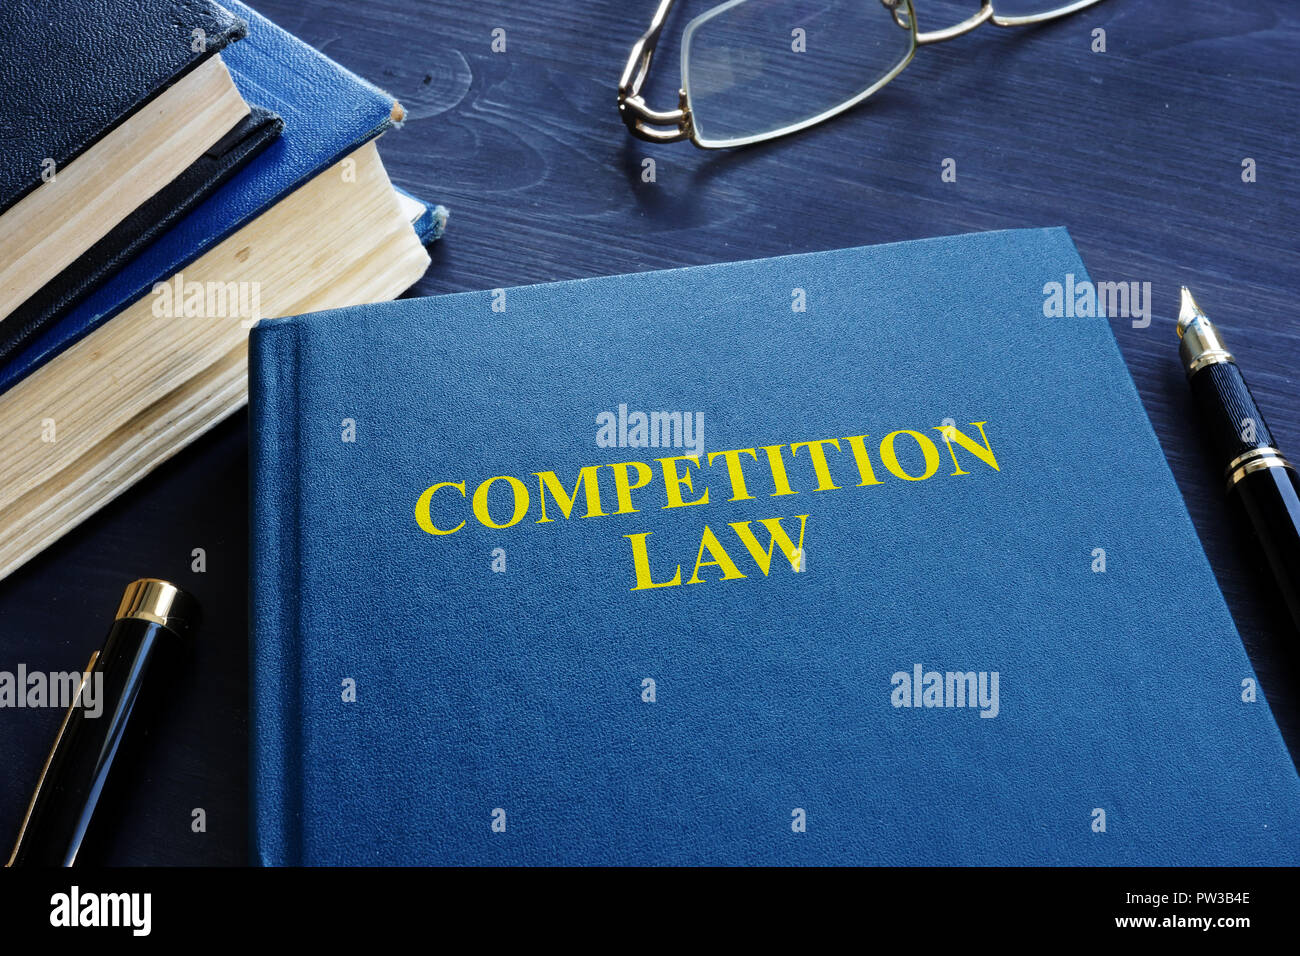 Competition law and pen on a table. Stock Photo